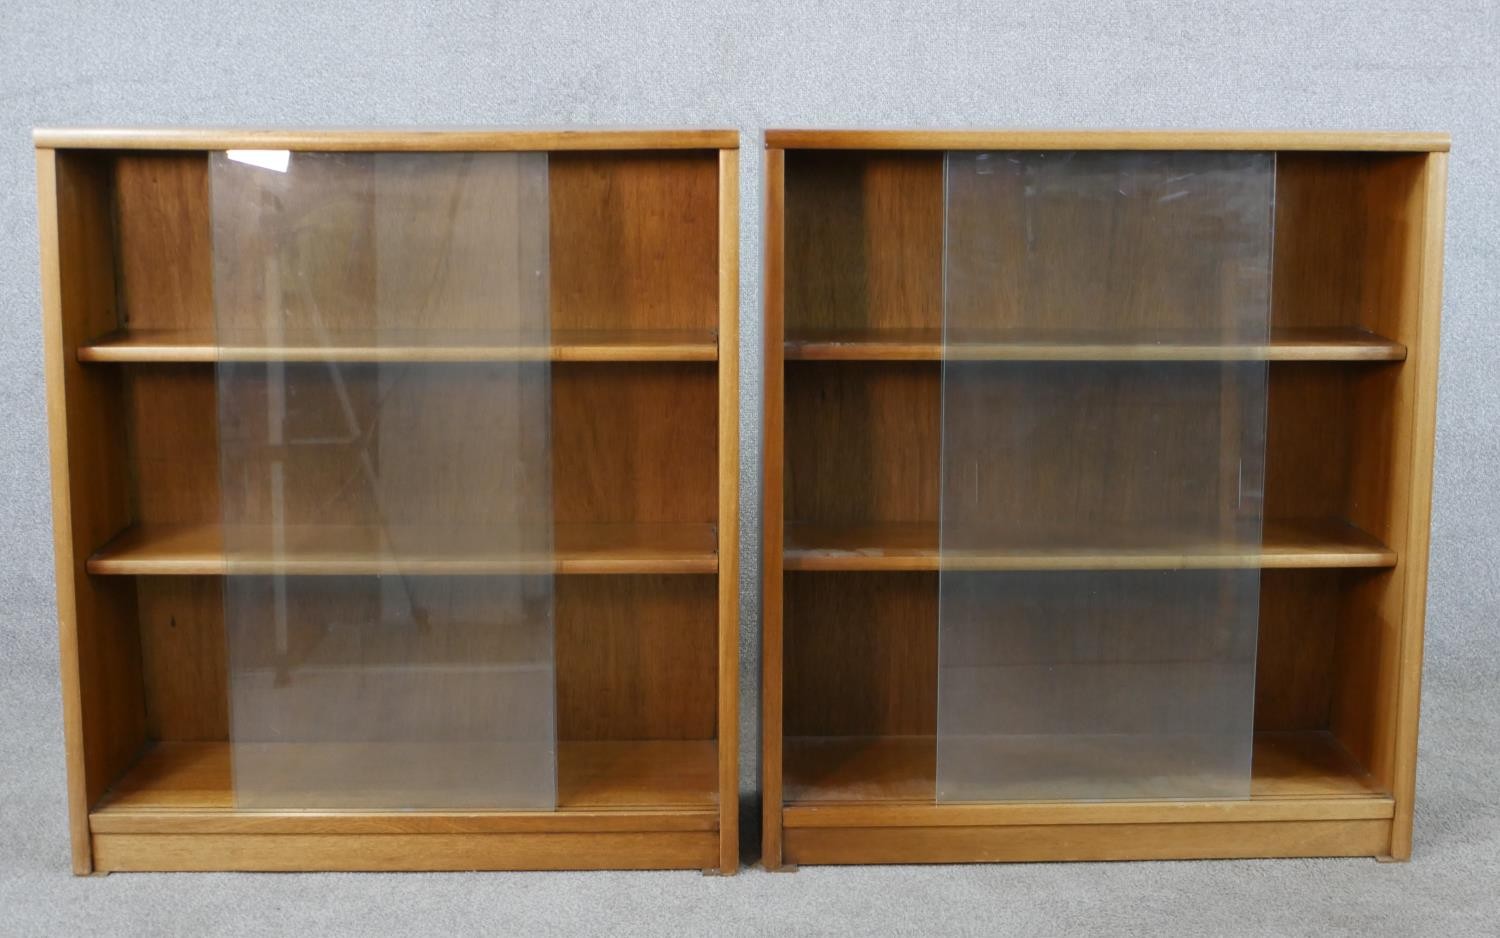 A pair of circa 1970s Jonell bookcases, with a pair of glass sliding doors enclosing shelves, on a - Image 4 of 8